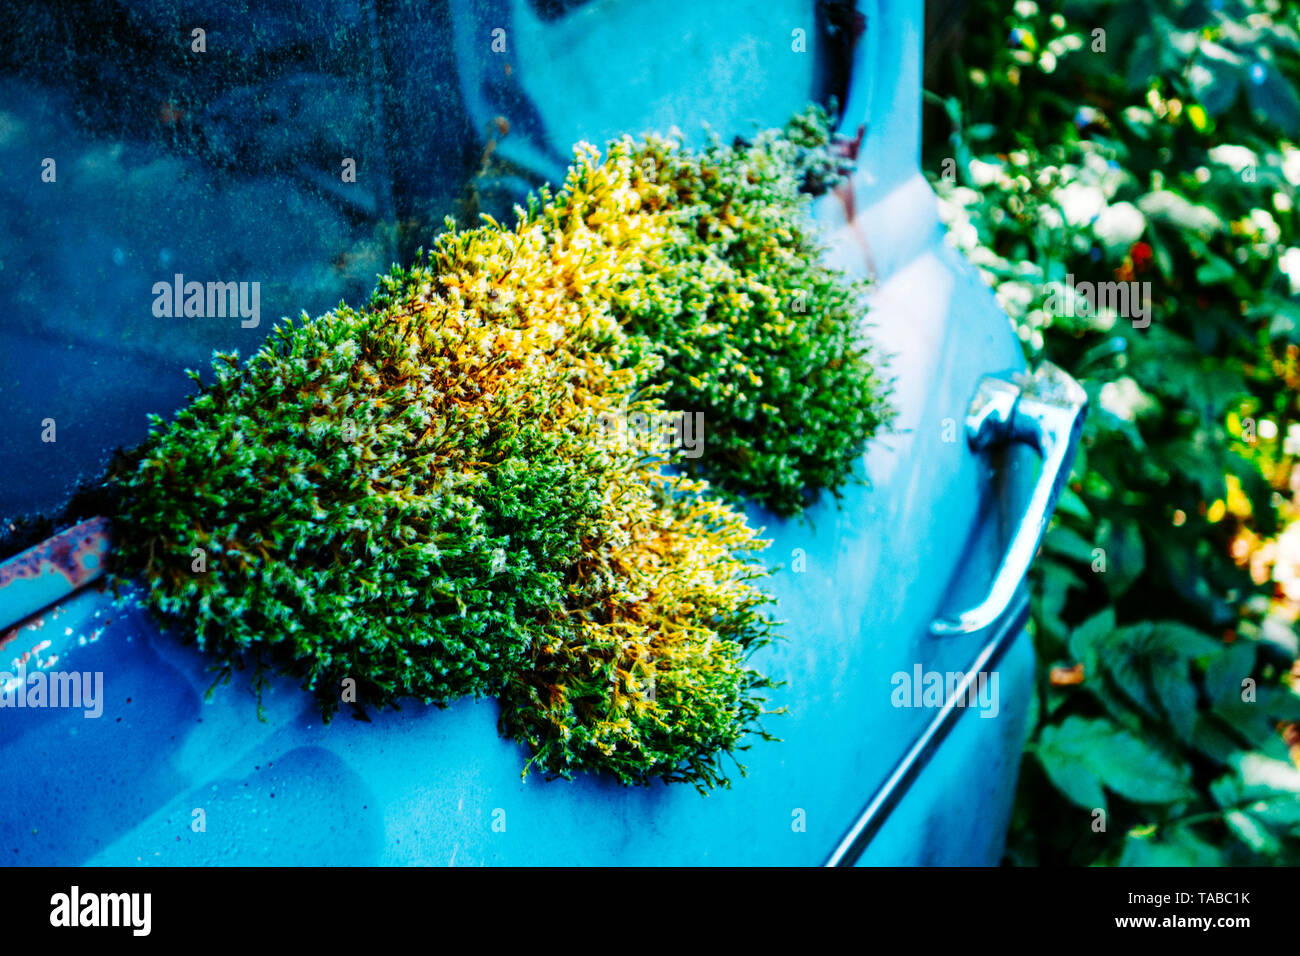 Car wreck overgrown by moss Stock Photo